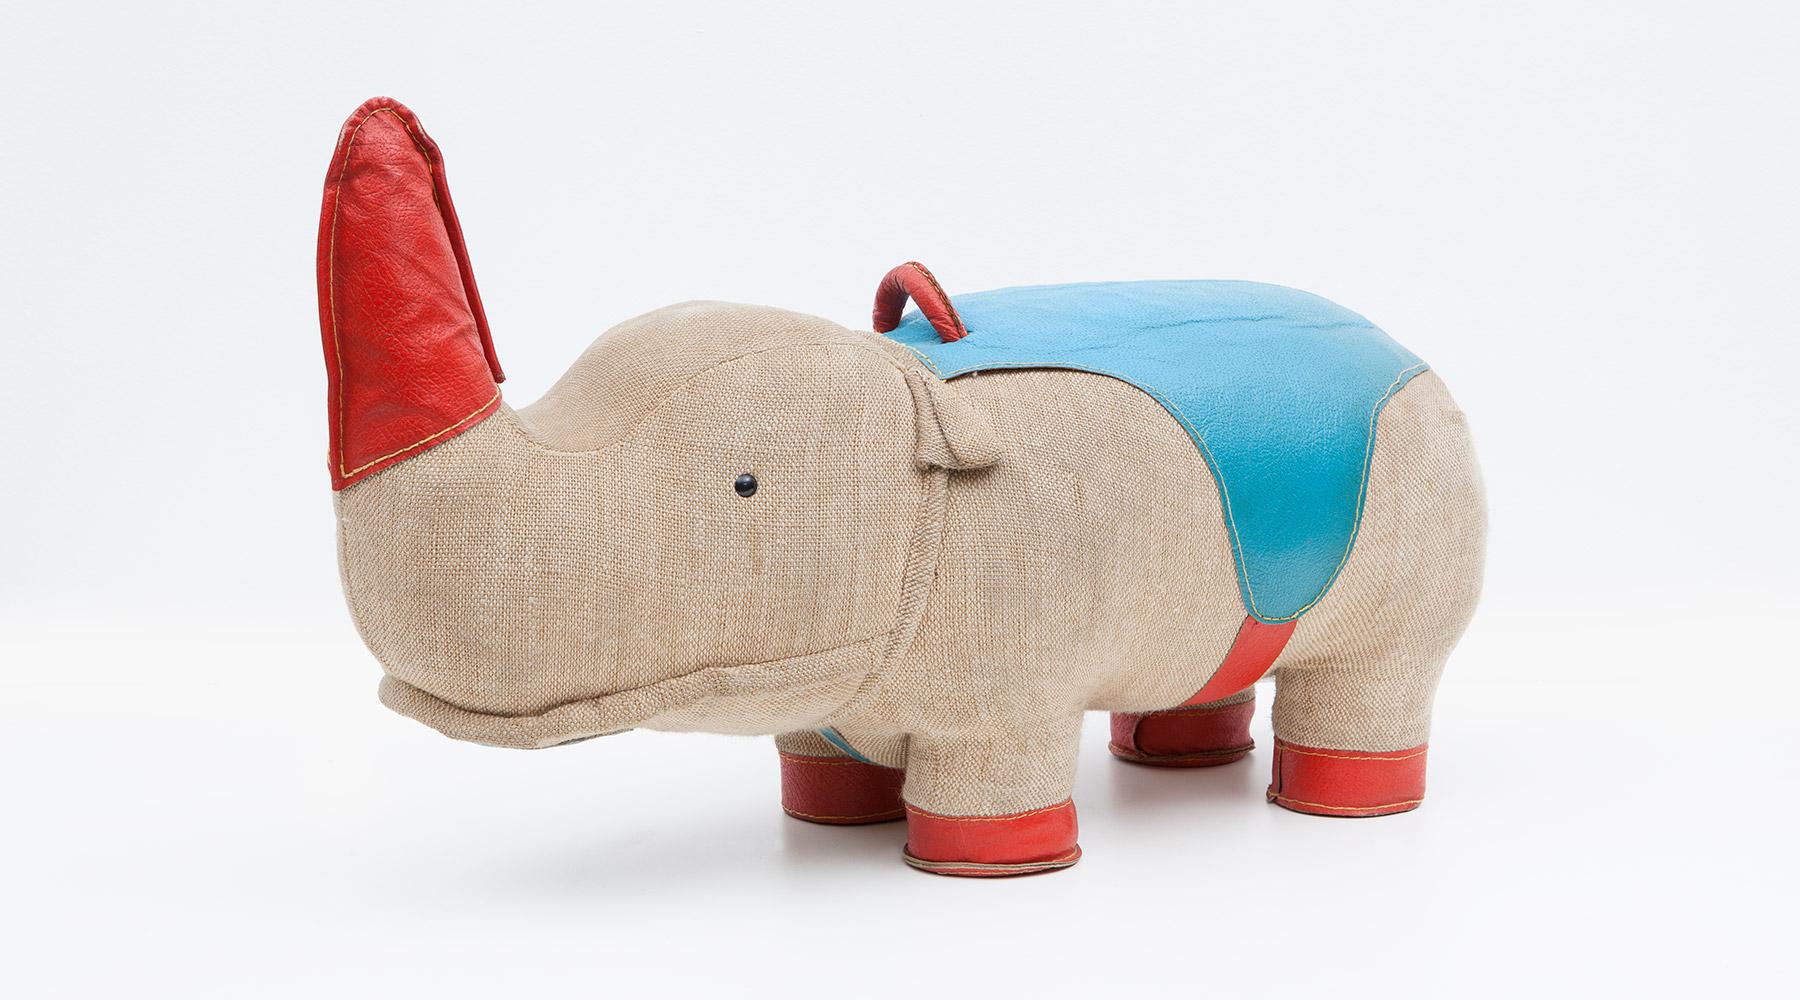 Rhino, children toy in jute and leather by Renate Müller, Germany, 1967.

Authentic animal toy from the 1960s by Renate Müller. Unique in shape and workmanship. This example shows a rhino made of jute and leather details in red and blue. High